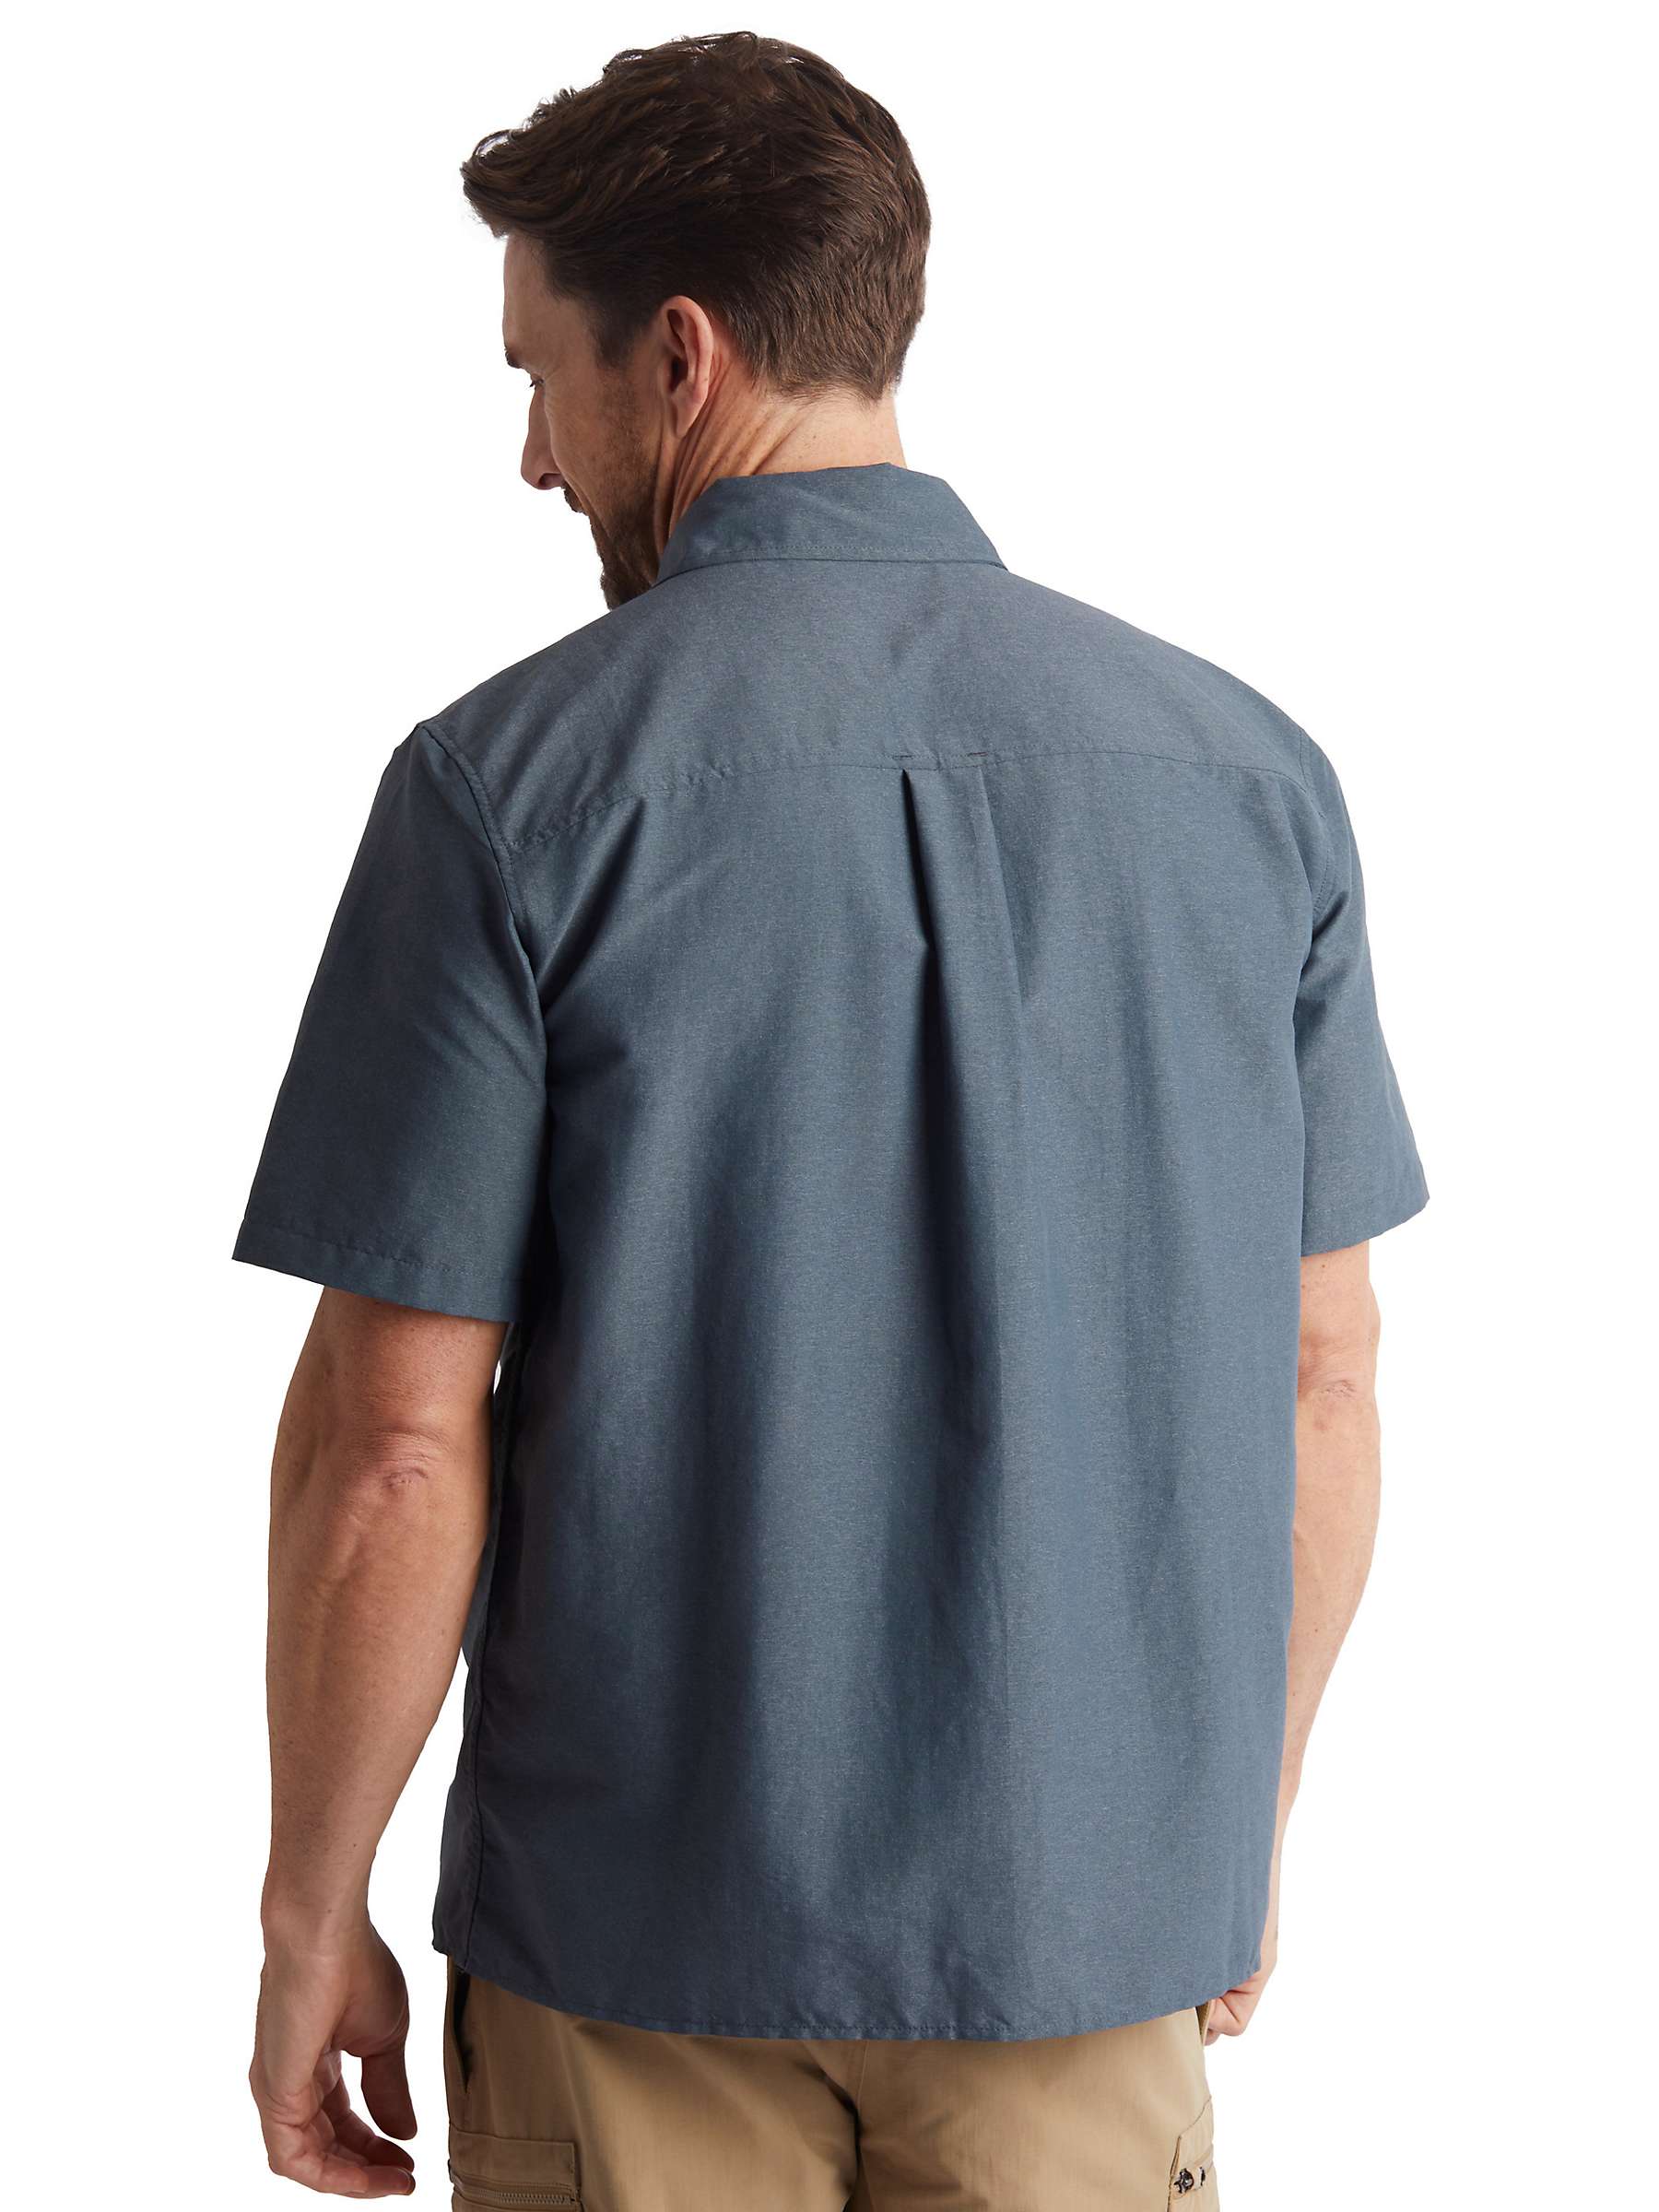 Buy Rohan Frontier Anti-Insect Short Sleeve Expedition Shirt, Grey Online at johnlewis.com